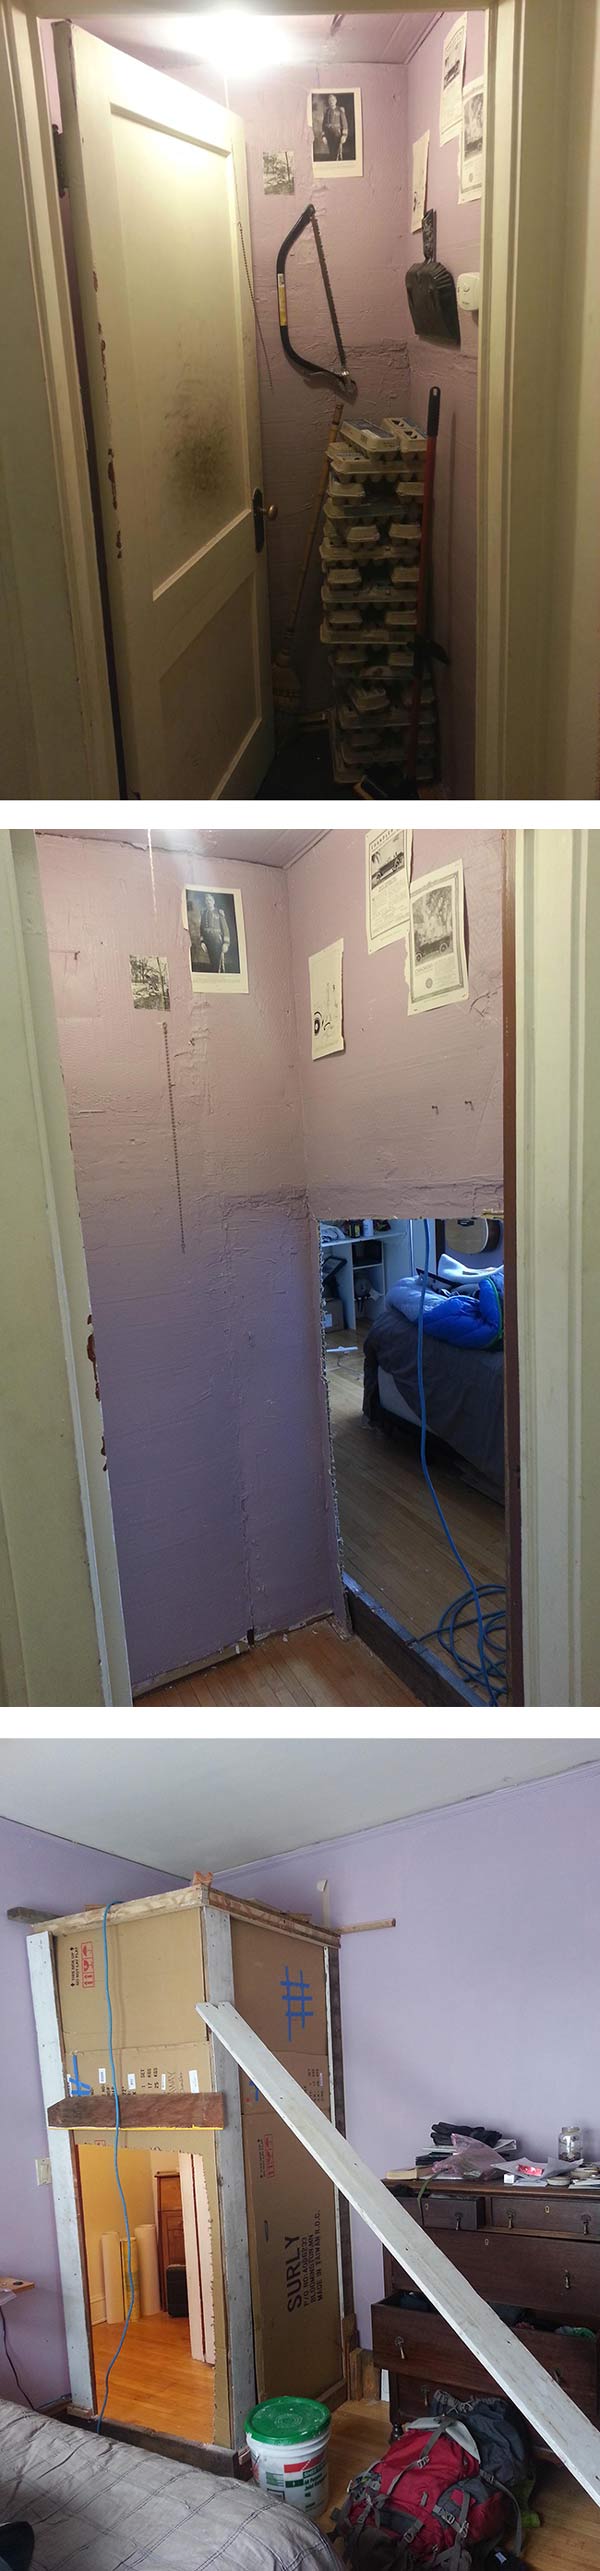 Friends pranked me by converting my bedroom to a utility closet